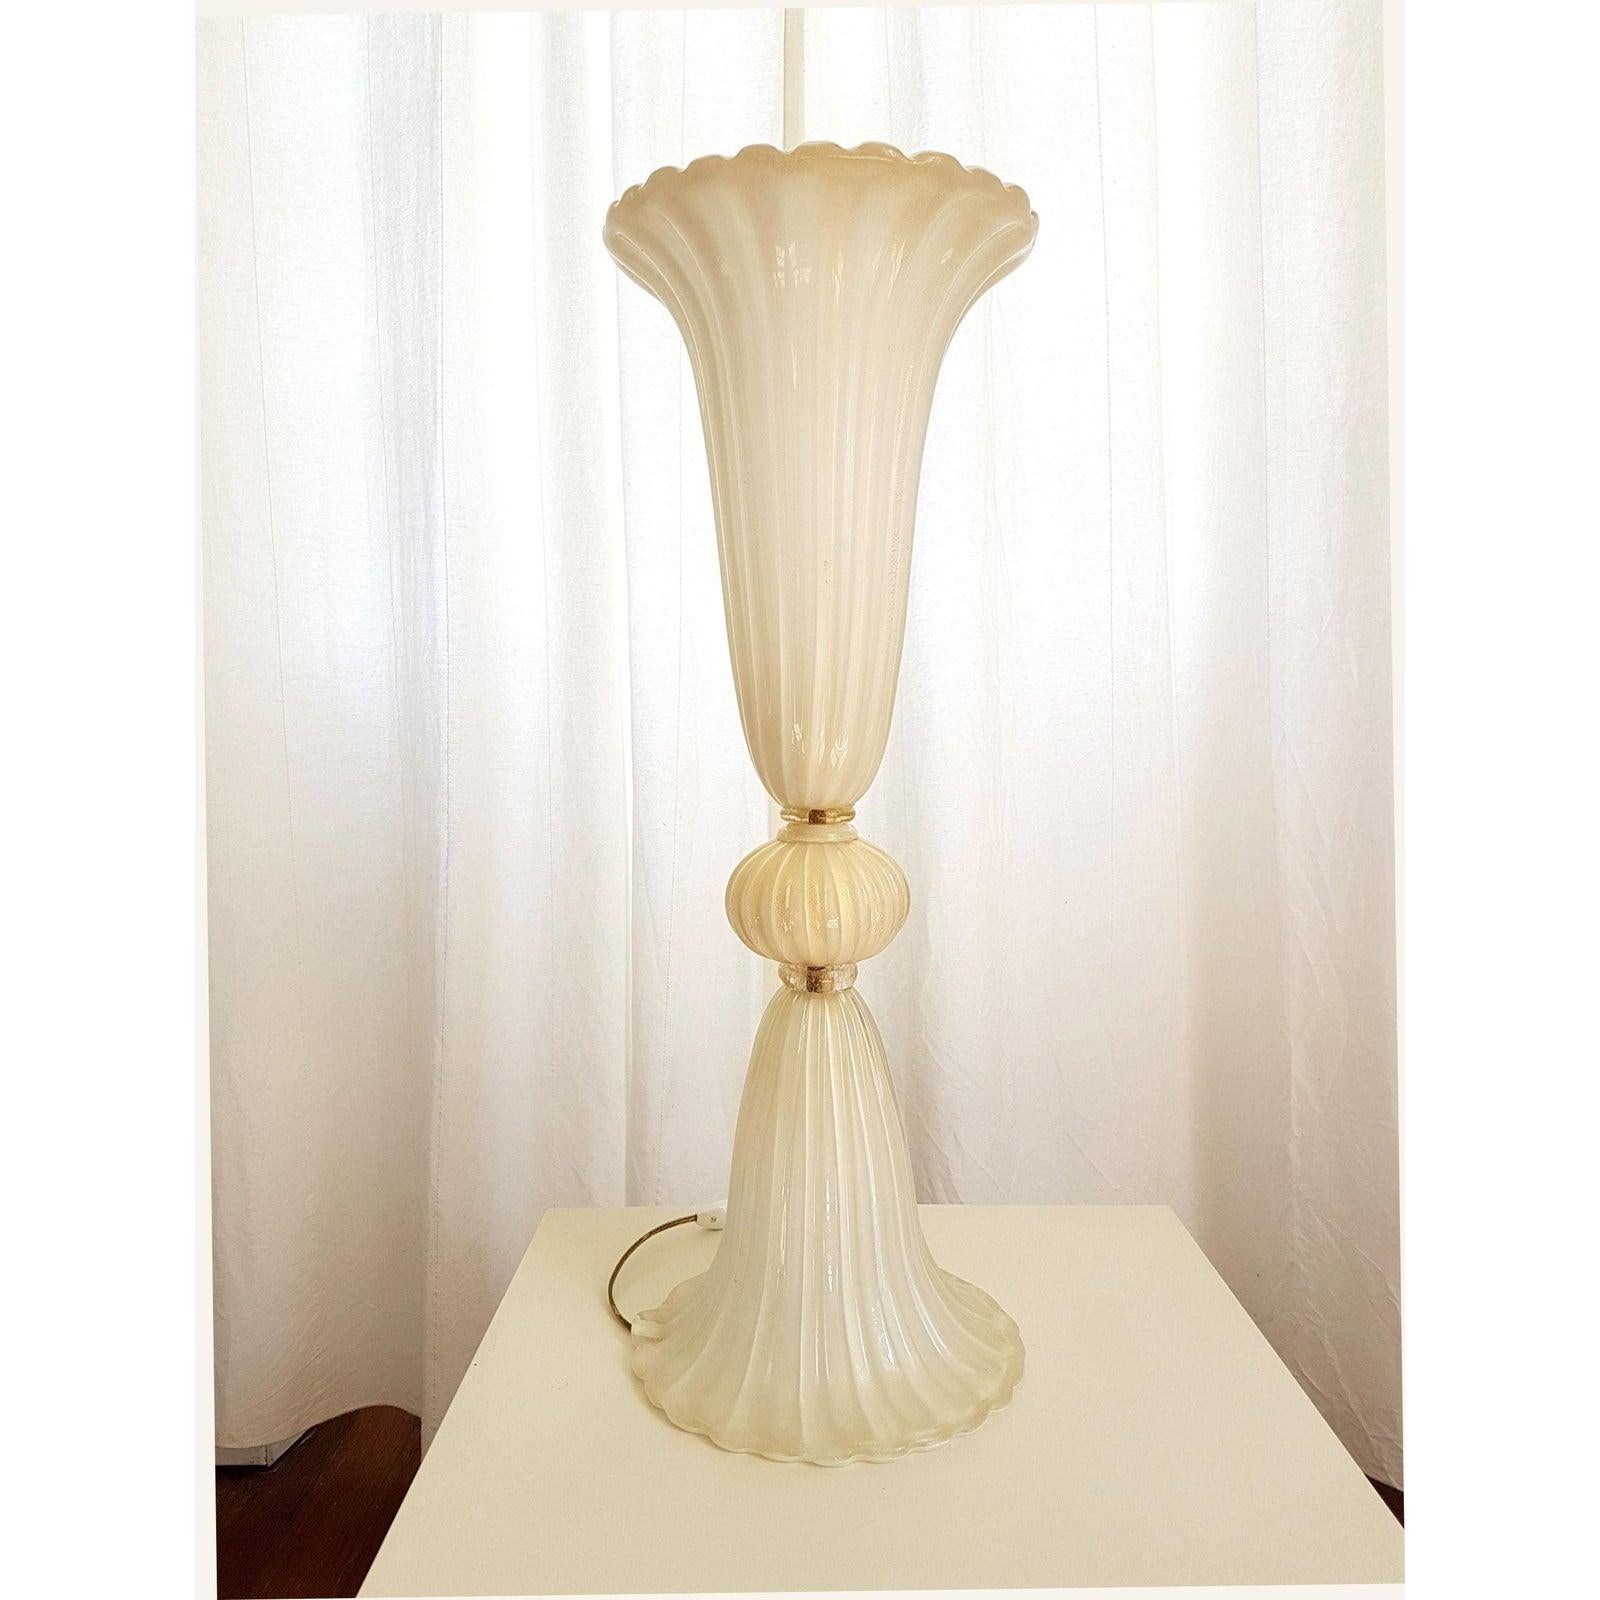 Barovier and Toso style, Mid-Century Modern pair of extra large table lamps, or floor lamps in hand blown Murano glass.
Murano, Italy, 1970s.
The neoclassical style lamps are made of handmade translucent white Murano glass, with gold inclusions.